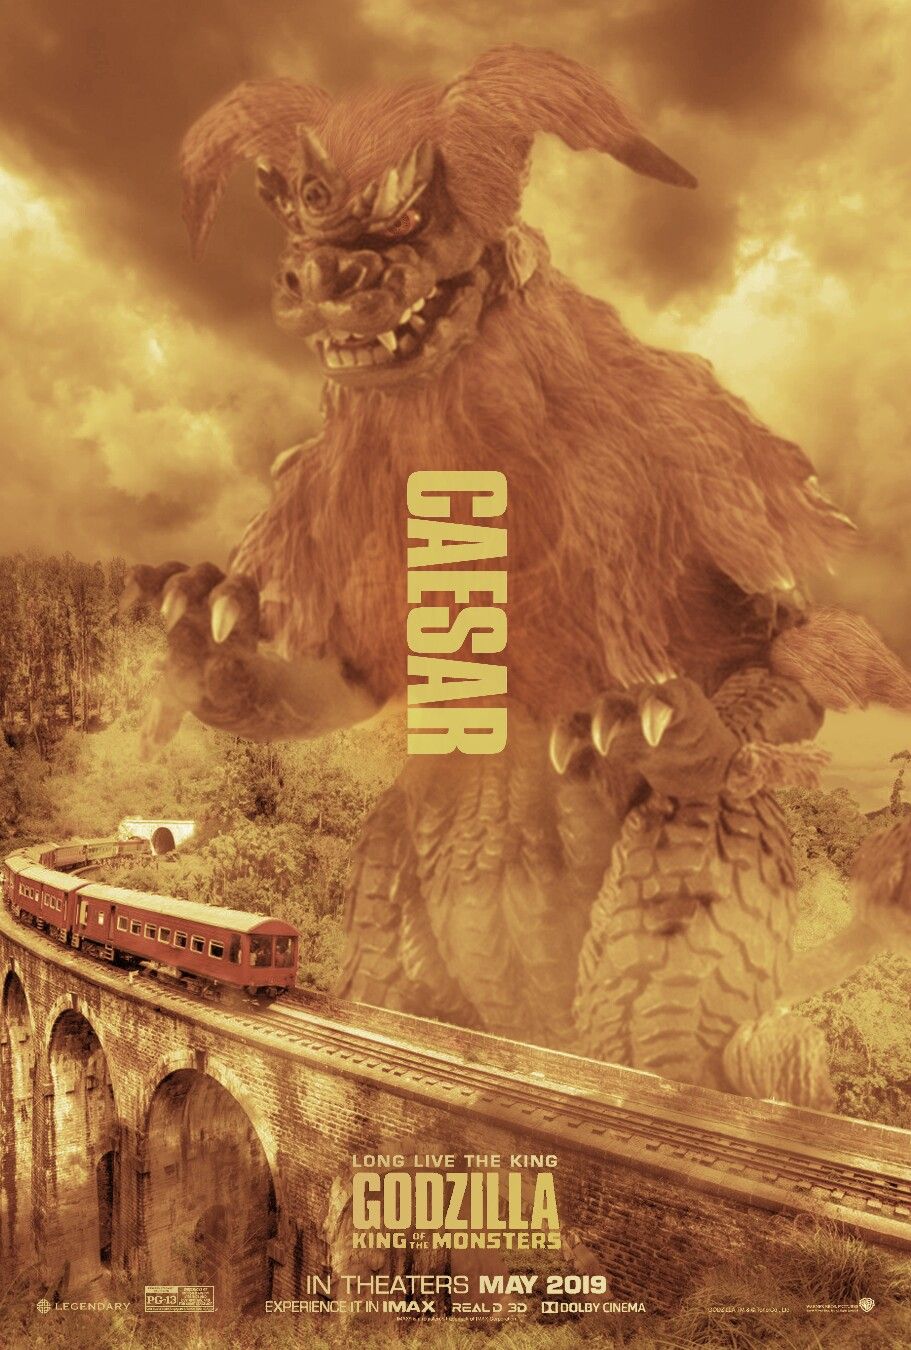 Dont like the look for the monsterverse but king ceasar would be badass. All godzilla monsters, Kaiju monsters, Godzilla franchise